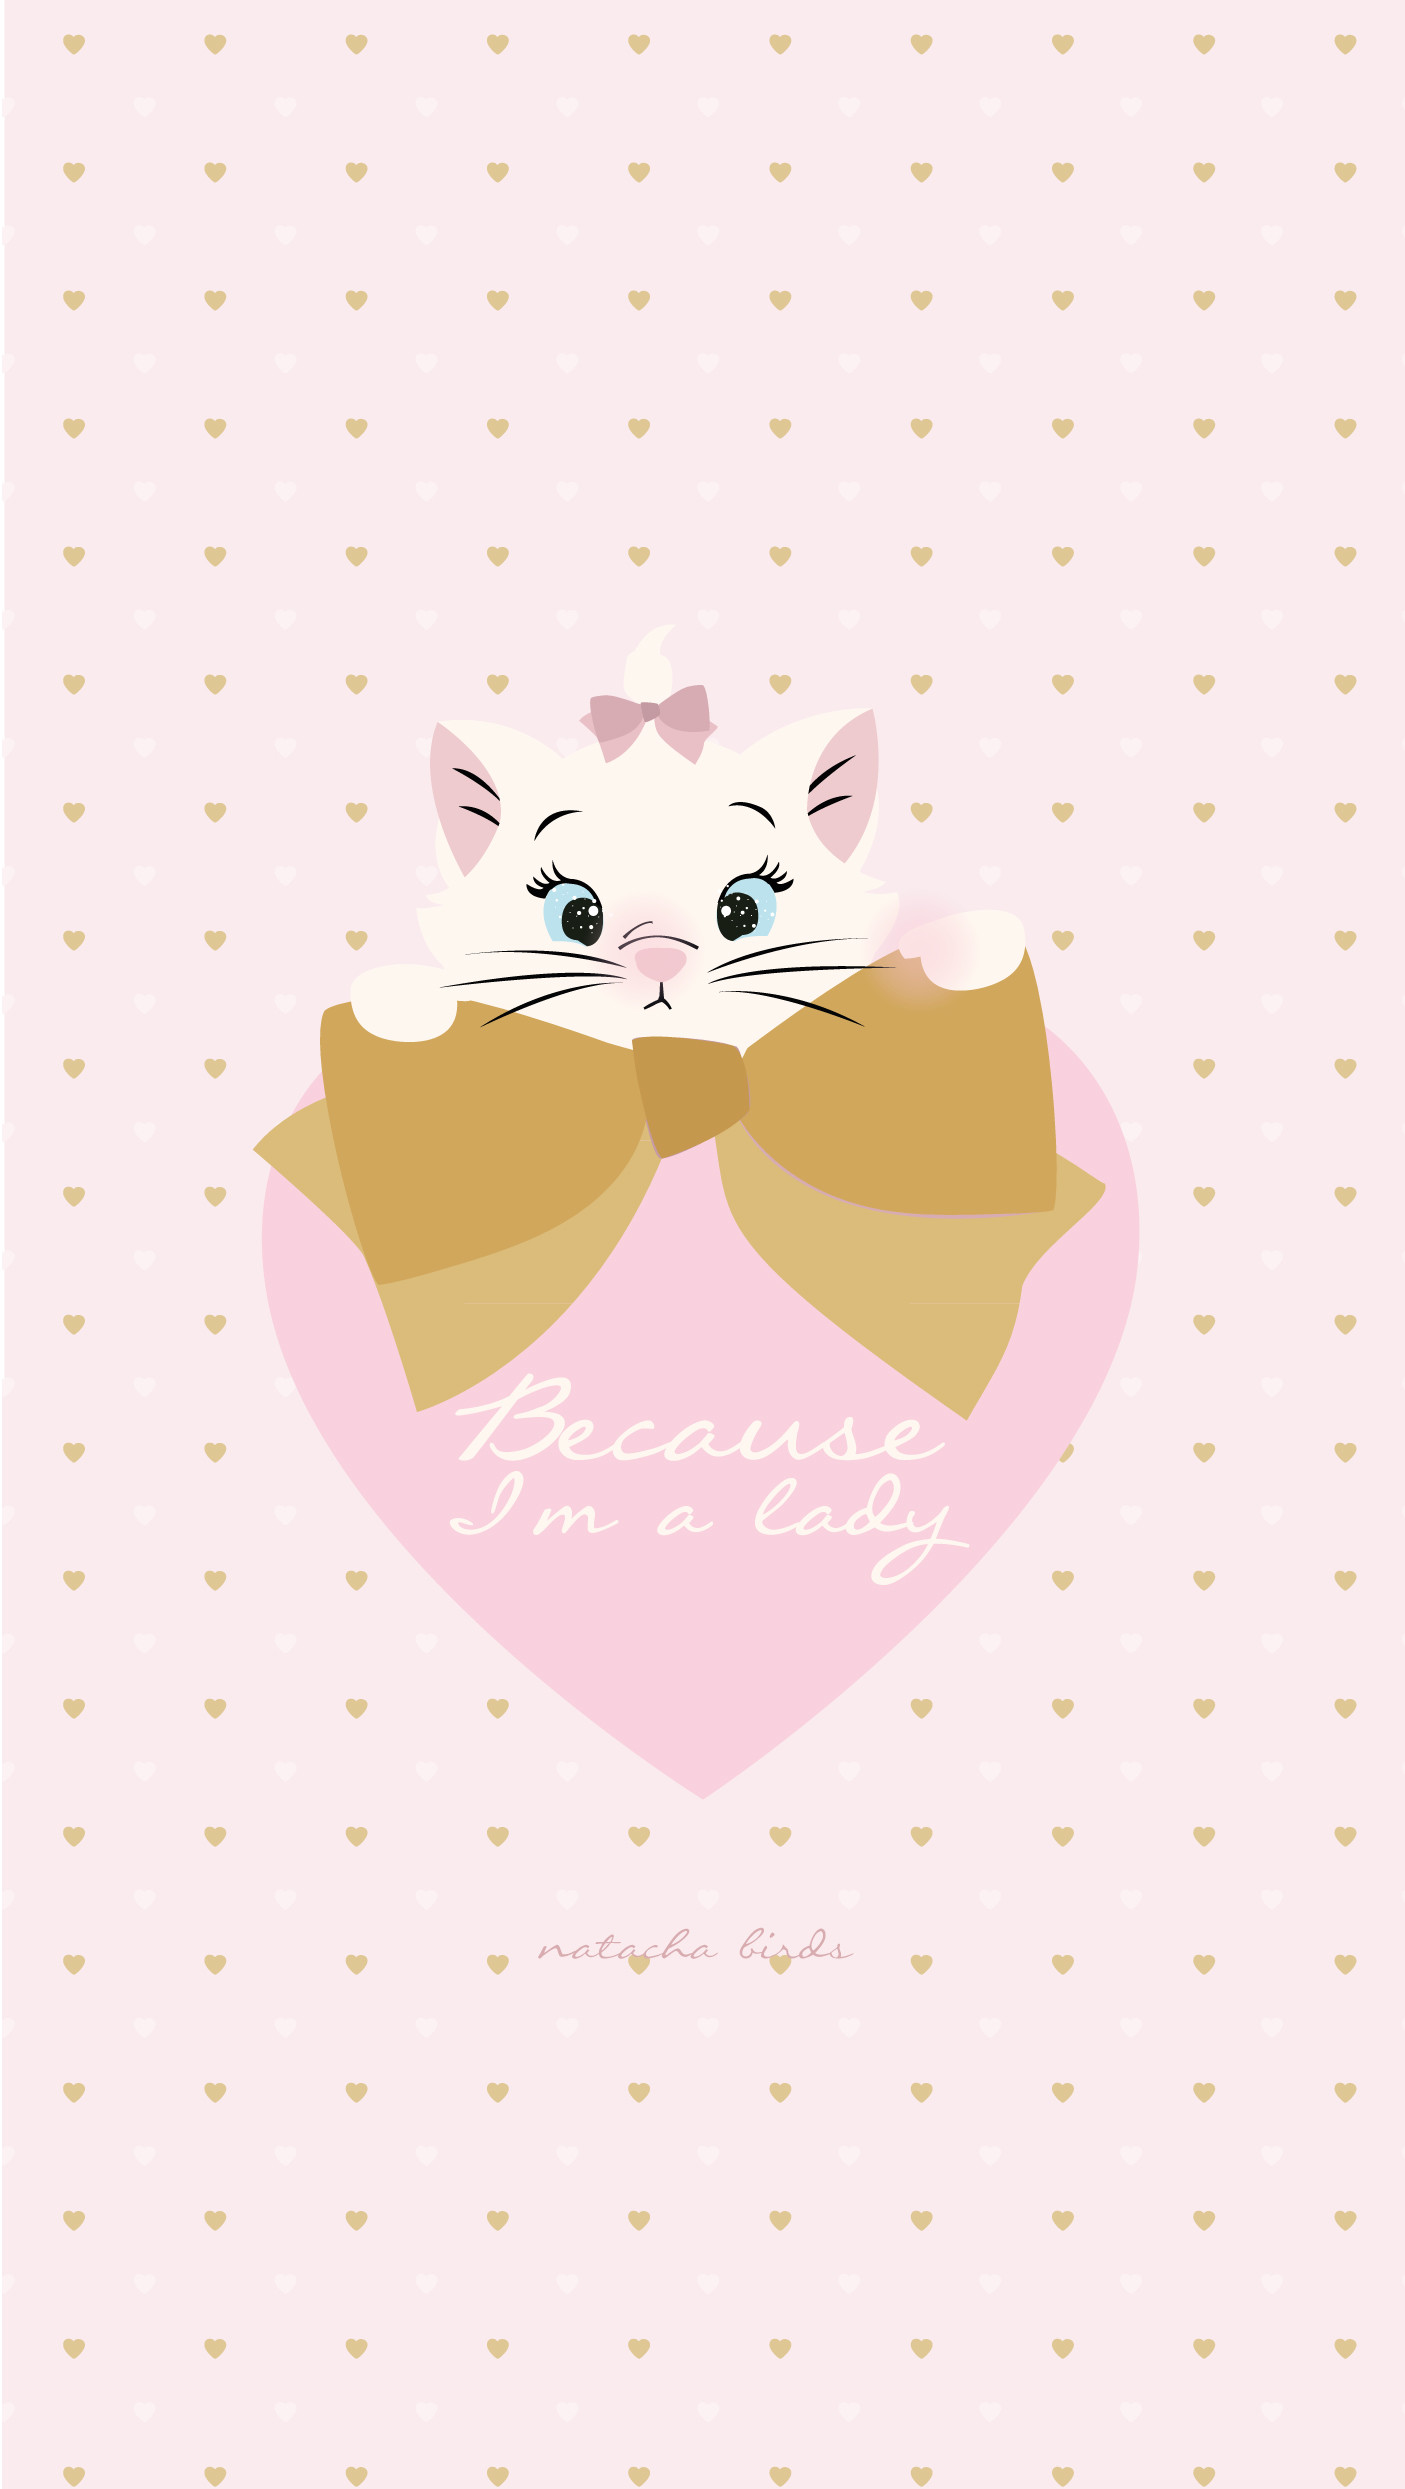 Disney Aristocats Marie "Because I'm a Lady" free iphone background  wallpaper design